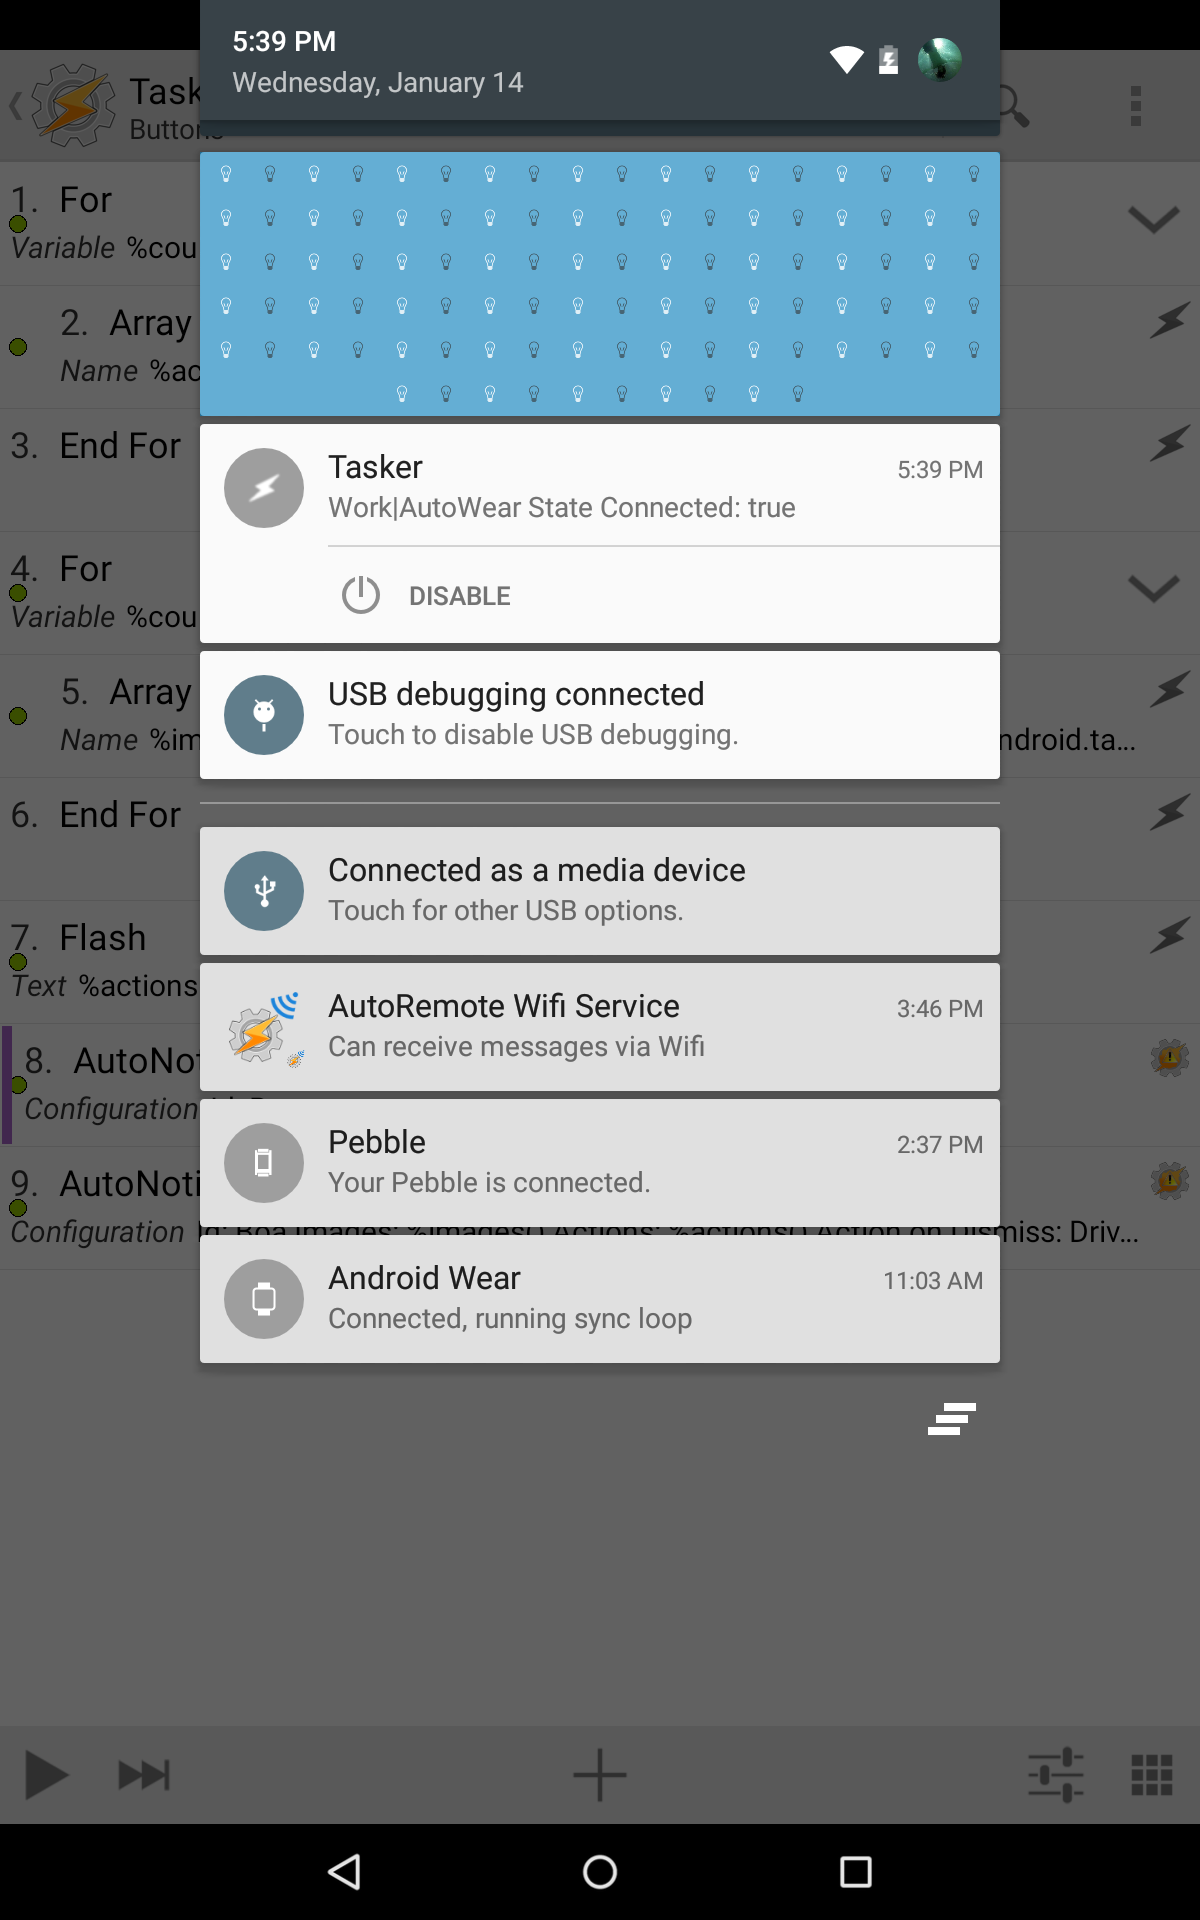 Autonotification Update With Buttons, Replies And More – Tasker And Join